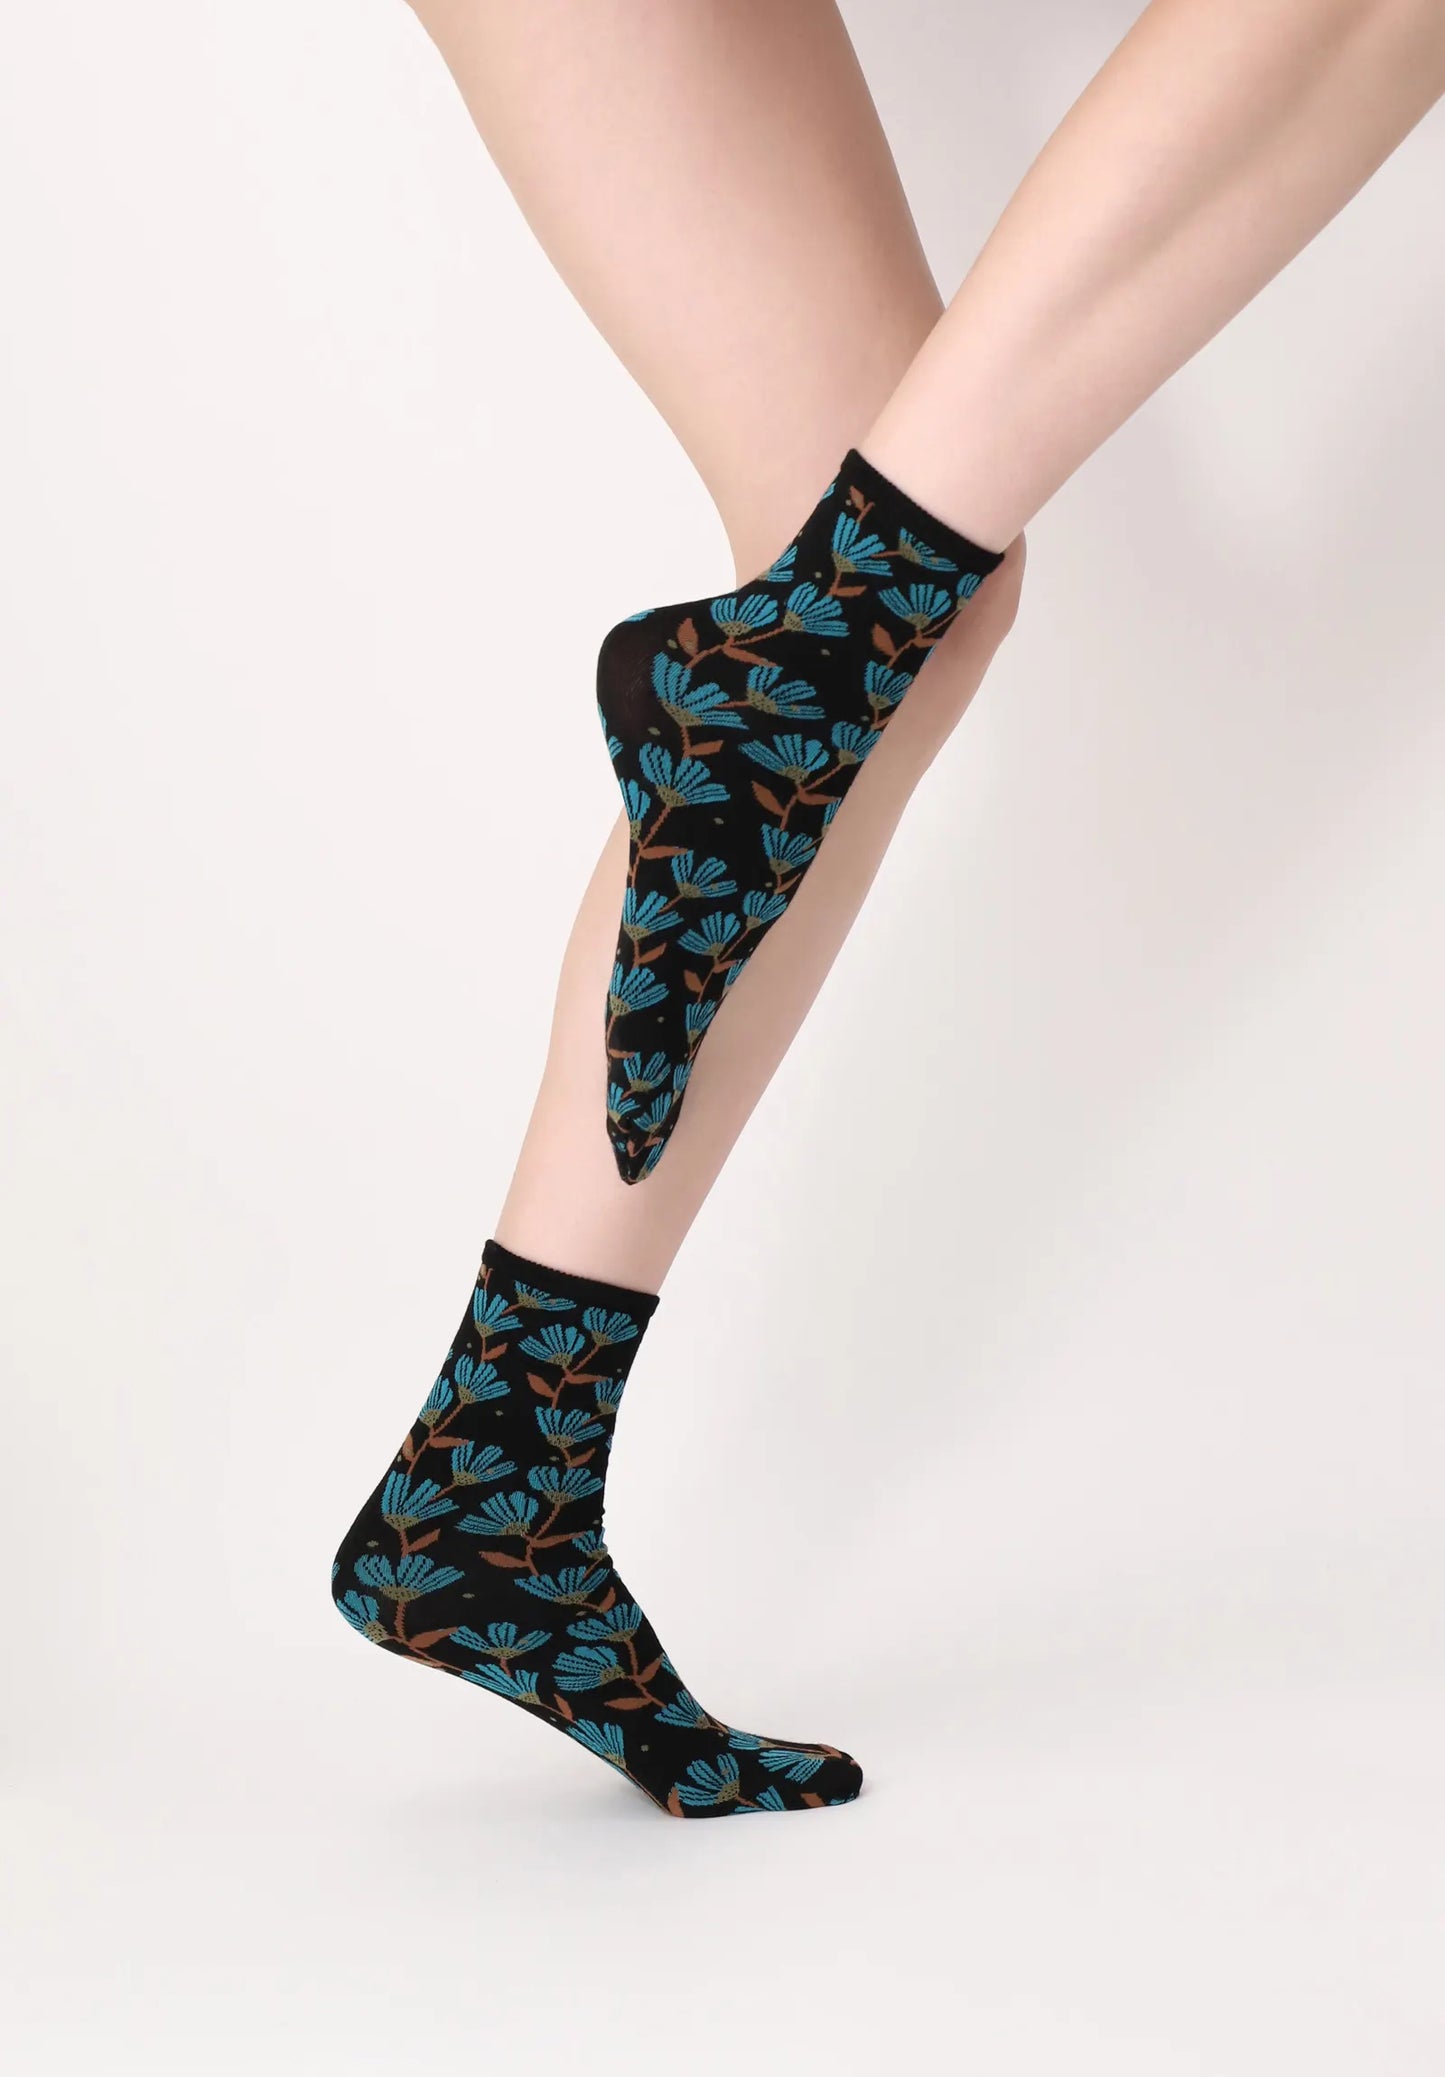 Oroblù Bloom Calzini - Black viscose mix fashion ankle socks with an all over woven floral pattern in teal blue, rusty brown and green.